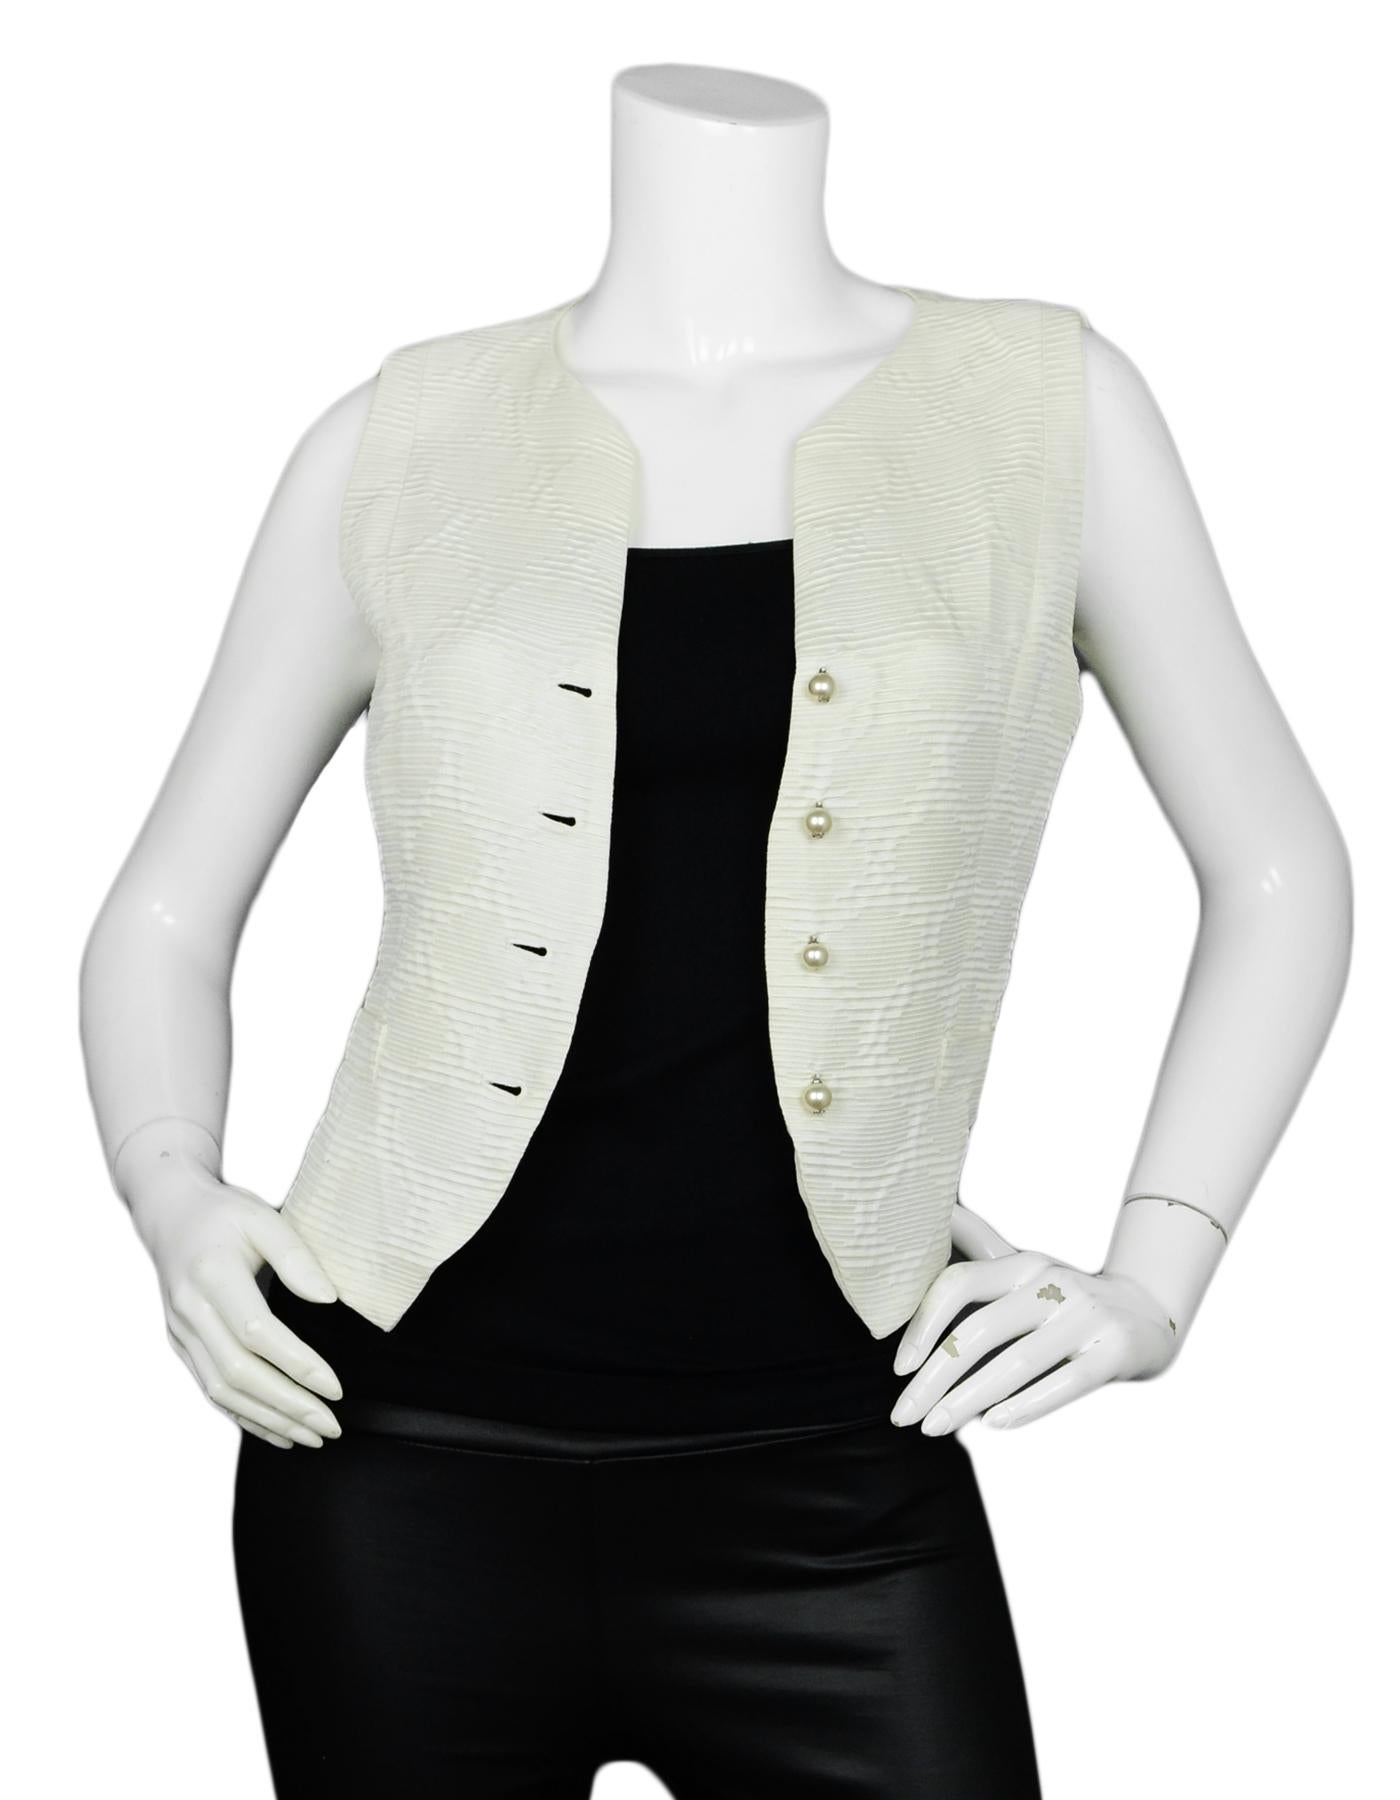 Chanel Cream Silk Vest w/ Pearl CC Buttons

Made In: France
Year of Production: 2014
Color: Cream
Materials: 100% Silk
Lining: 100% Silk
Opening/Closure: Front Pearl Buttons
Overall Condition: Excellent pre-owned condition, with the exception of a